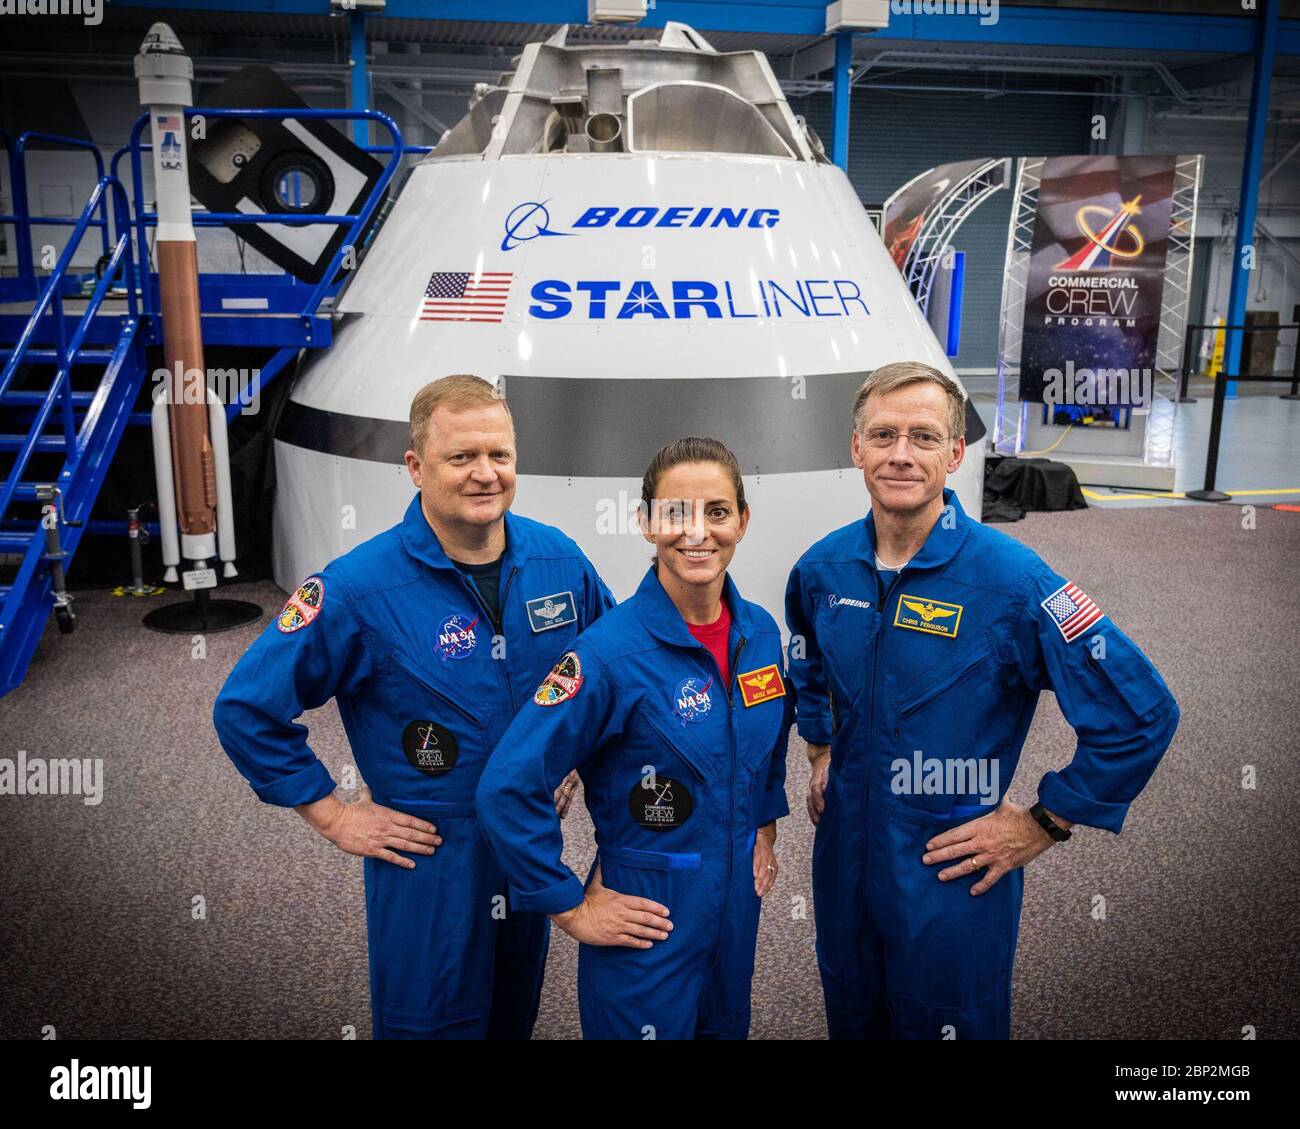 Commercial Crew Program (jsc2018e067950) From left NASA astronauts Eric Boe and Nicole Mann, along with Boeing astronaut Chris Ferguson, gathered in front of the Boeing Mockup Trainer at NASA’s Johnson Space Center in Houston, Texas on Aug. 2, 2018 ahead of the commercial crew flight assignments announcement Aug. 3. The three were assigned to launch aboard Boeing’s CST-100 Starliner on the company’s Crew Flight Test targeted for mid-2019 in partnership with NASA’s Commercial Crew Program. Stock Photo